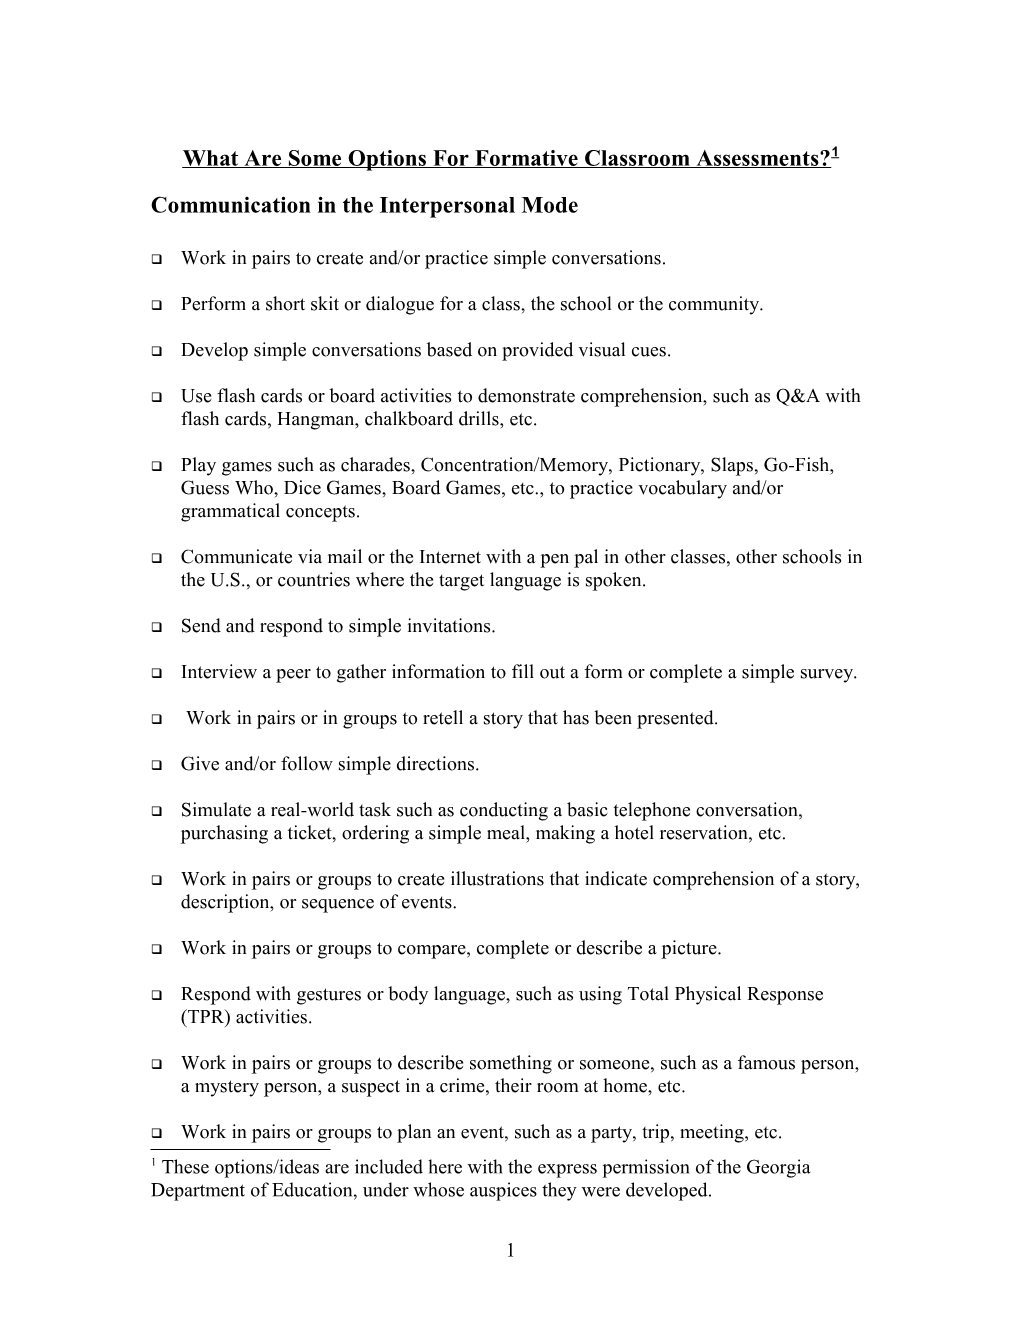 What Are Some Options for Formative Classroom Assessments